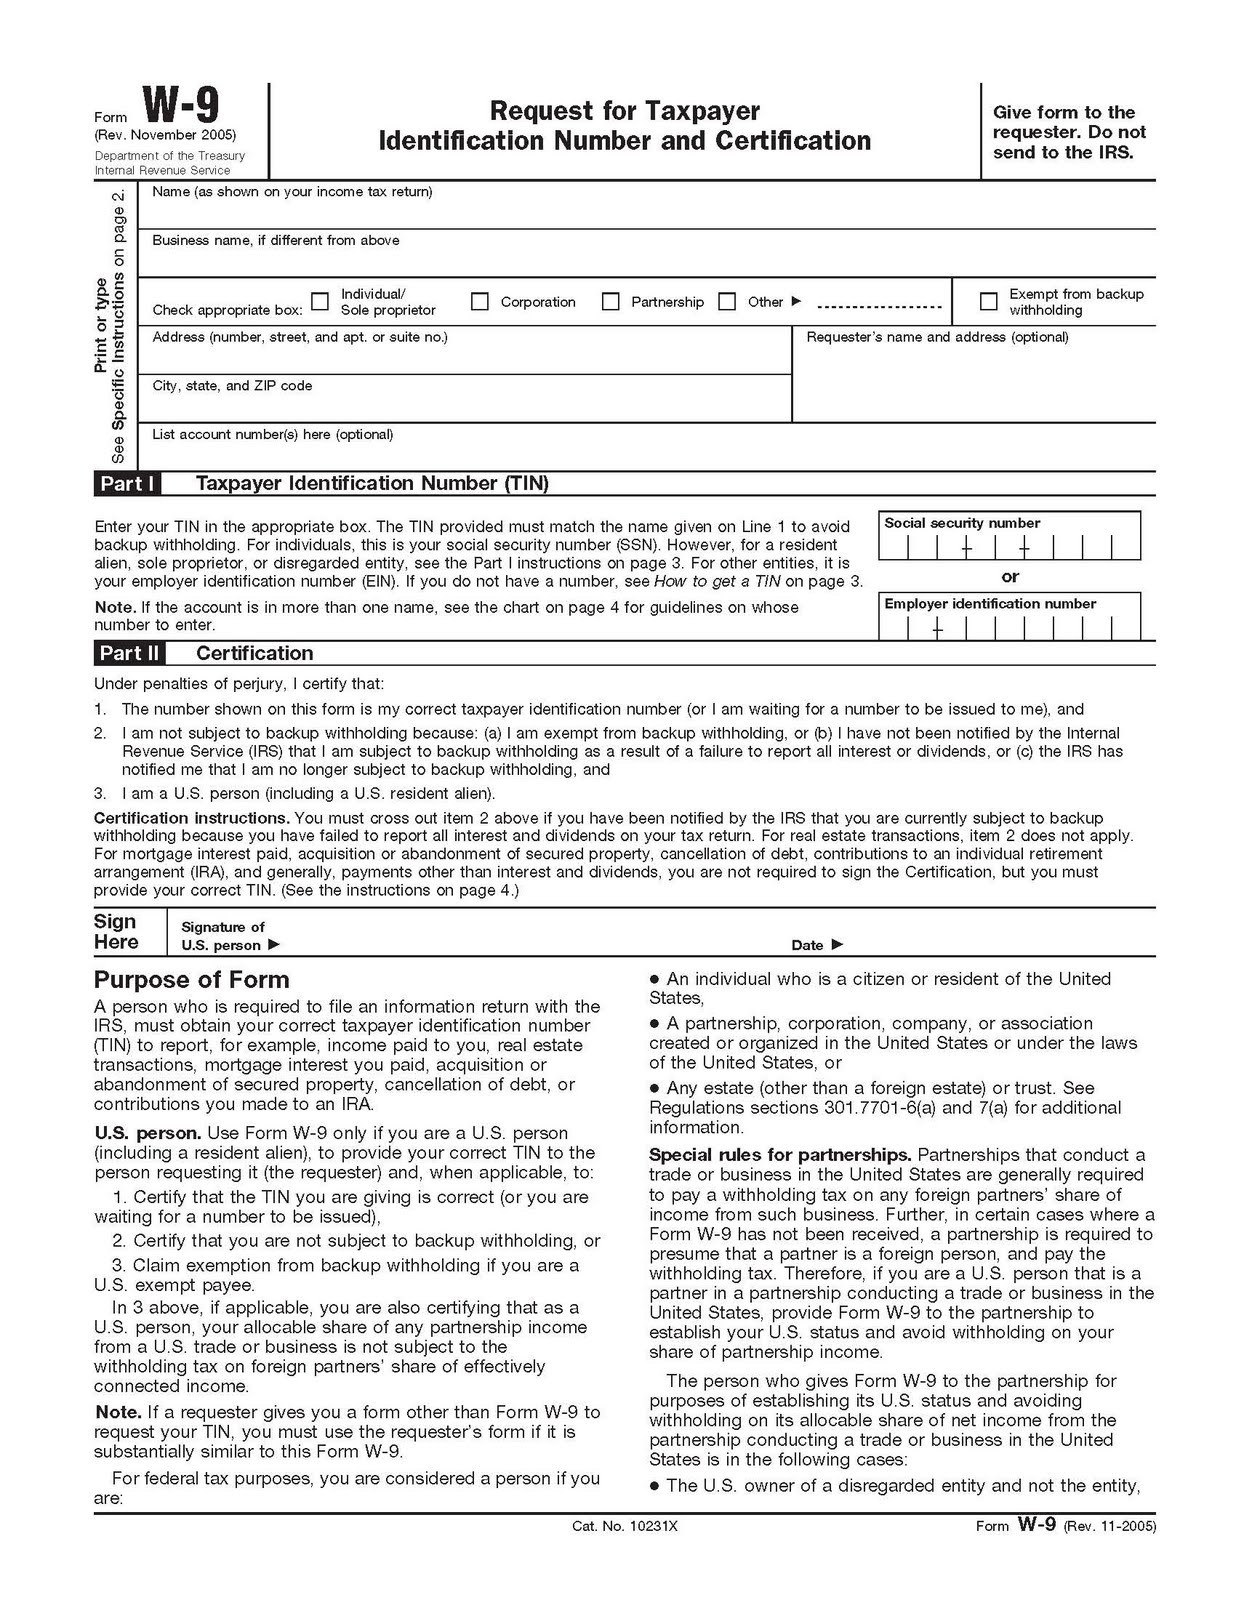 W9 Tax Exempt Form Is A And The Same W 9 Sales Vs Irs-Print Blank W9 Form